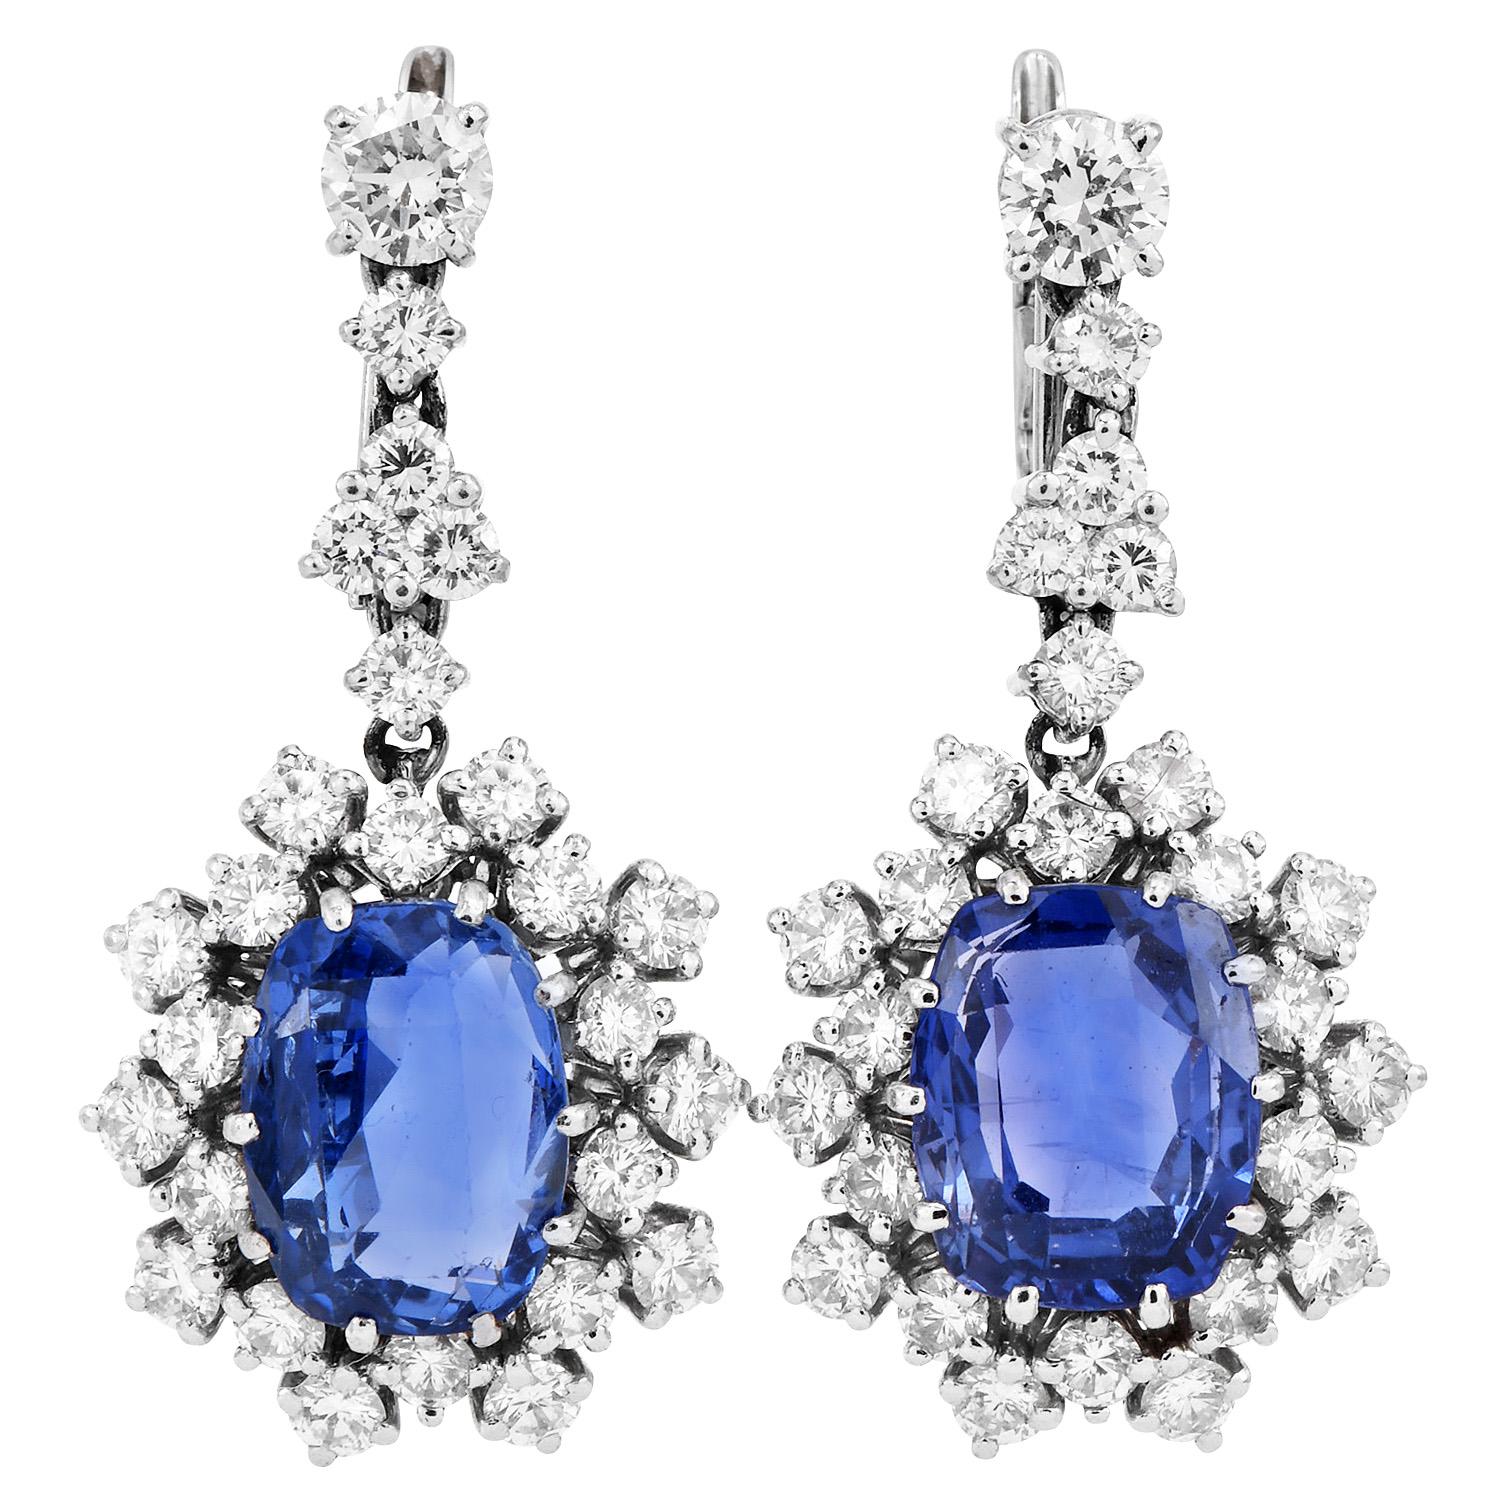 Presenting a beautiful vintage timeless Dimond Halo Princess Dangle Drop Earrings forged in Platinum.

GIA Certified Blue Modified Brilliant step Cushion Cut Extra Clean Sri Lankan Corn Flower Natural Sapphire 

Secured with Latch Back